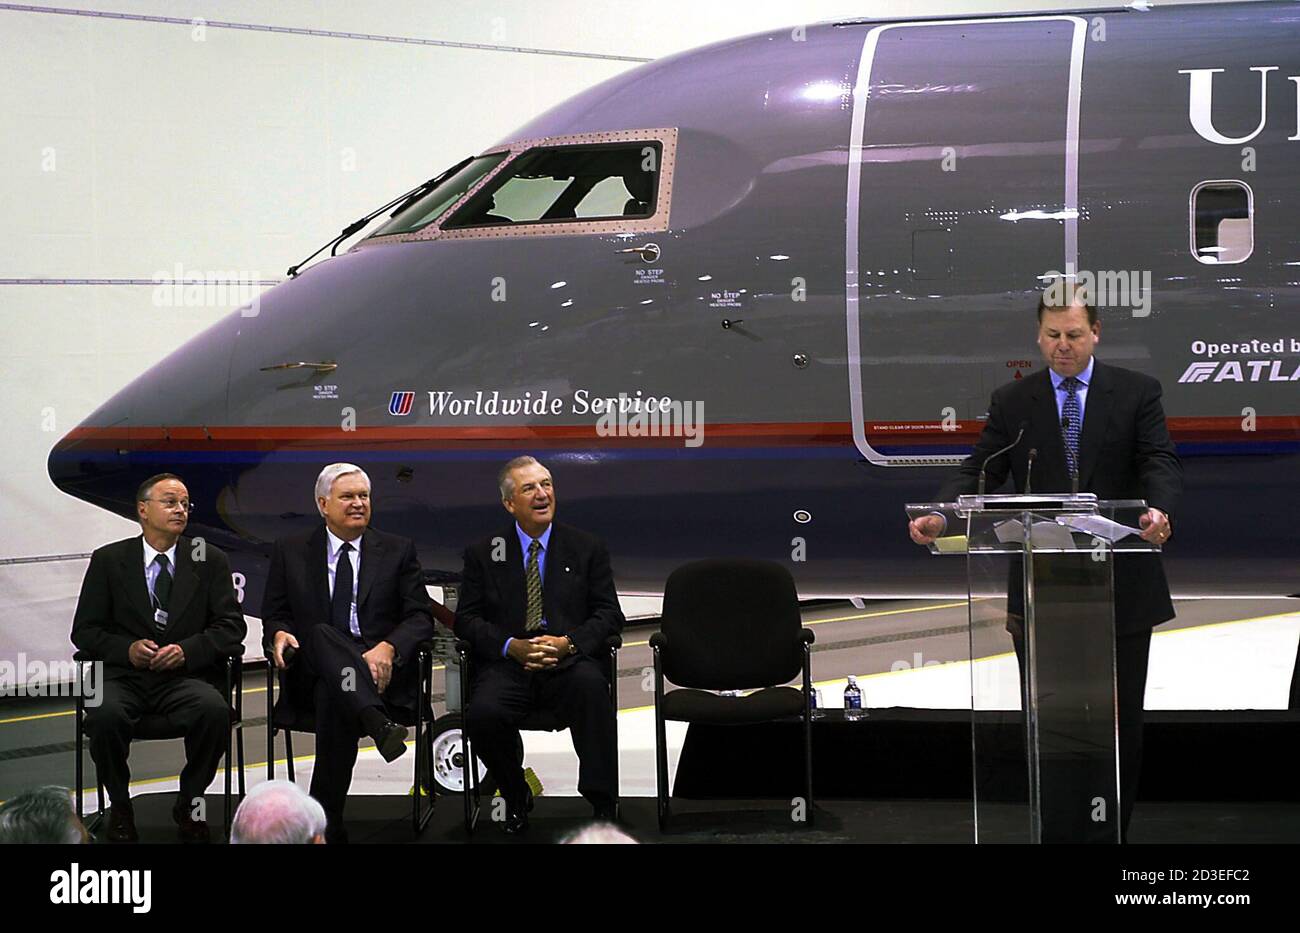 mikroskopisk galning øjeblikkelig Michael Graff, President and COO Bombardier Aerospace presents the 500th  CRJ aircraft, April 25, 2001 in Montreal. The aircraft is to be delivered  tomorrow to Atlantic Coast Airlines (ACA) in Sterling, Virginia.